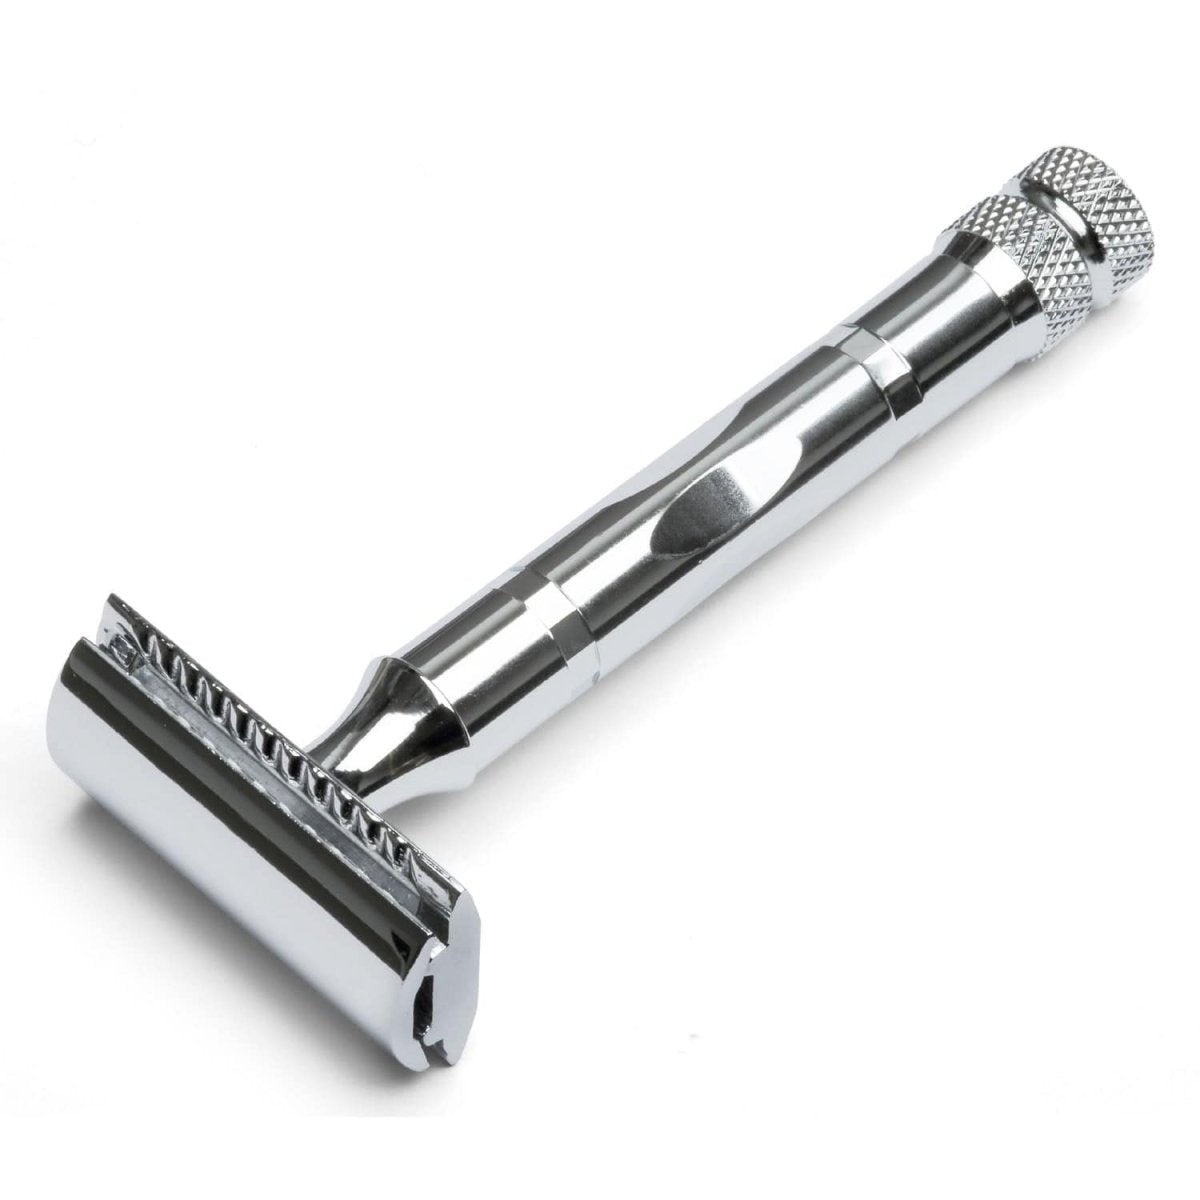 Parker Model 89R Three Piece Safety Razor with Nickel Plated Finish - Shaving Time